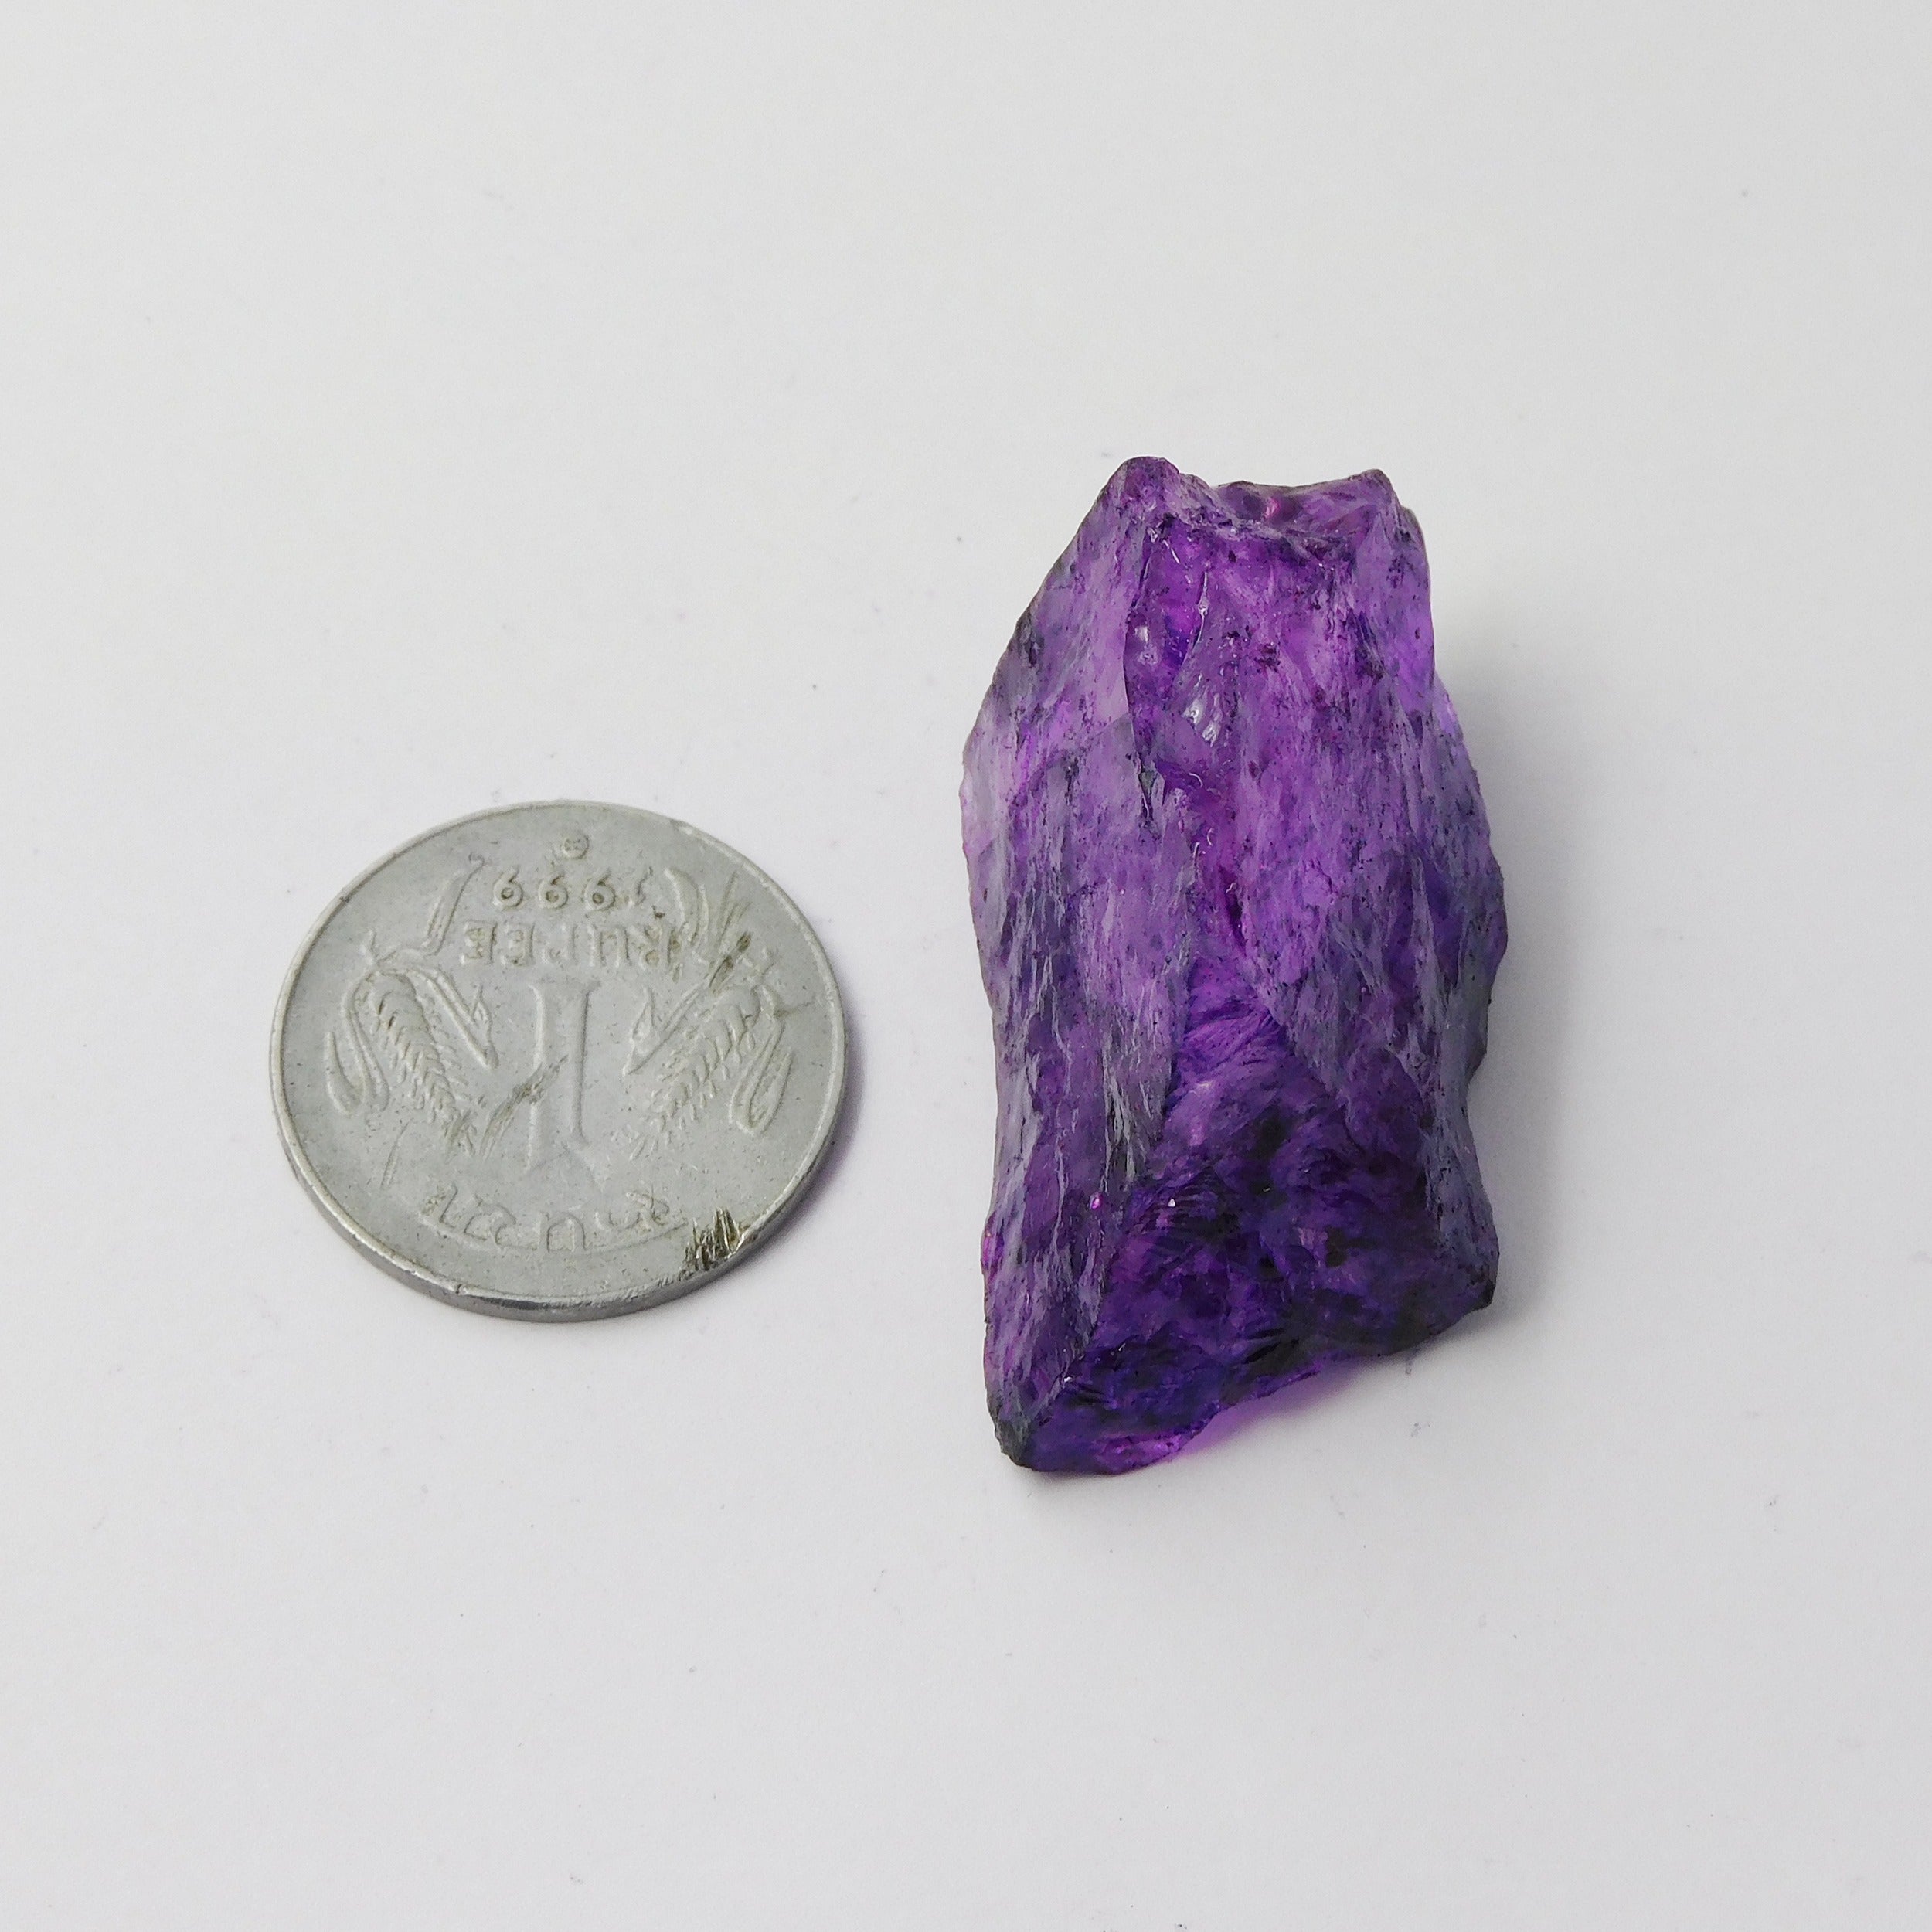 Best Price !! 124.35 Ct Natural Tanzanite Rough Purple Row Uncut CERTIFIED Earth Mined Gemstone Gemstone Rough Purple Tanzanite Natural Raugh Uncut  Free Sale Shipping Service